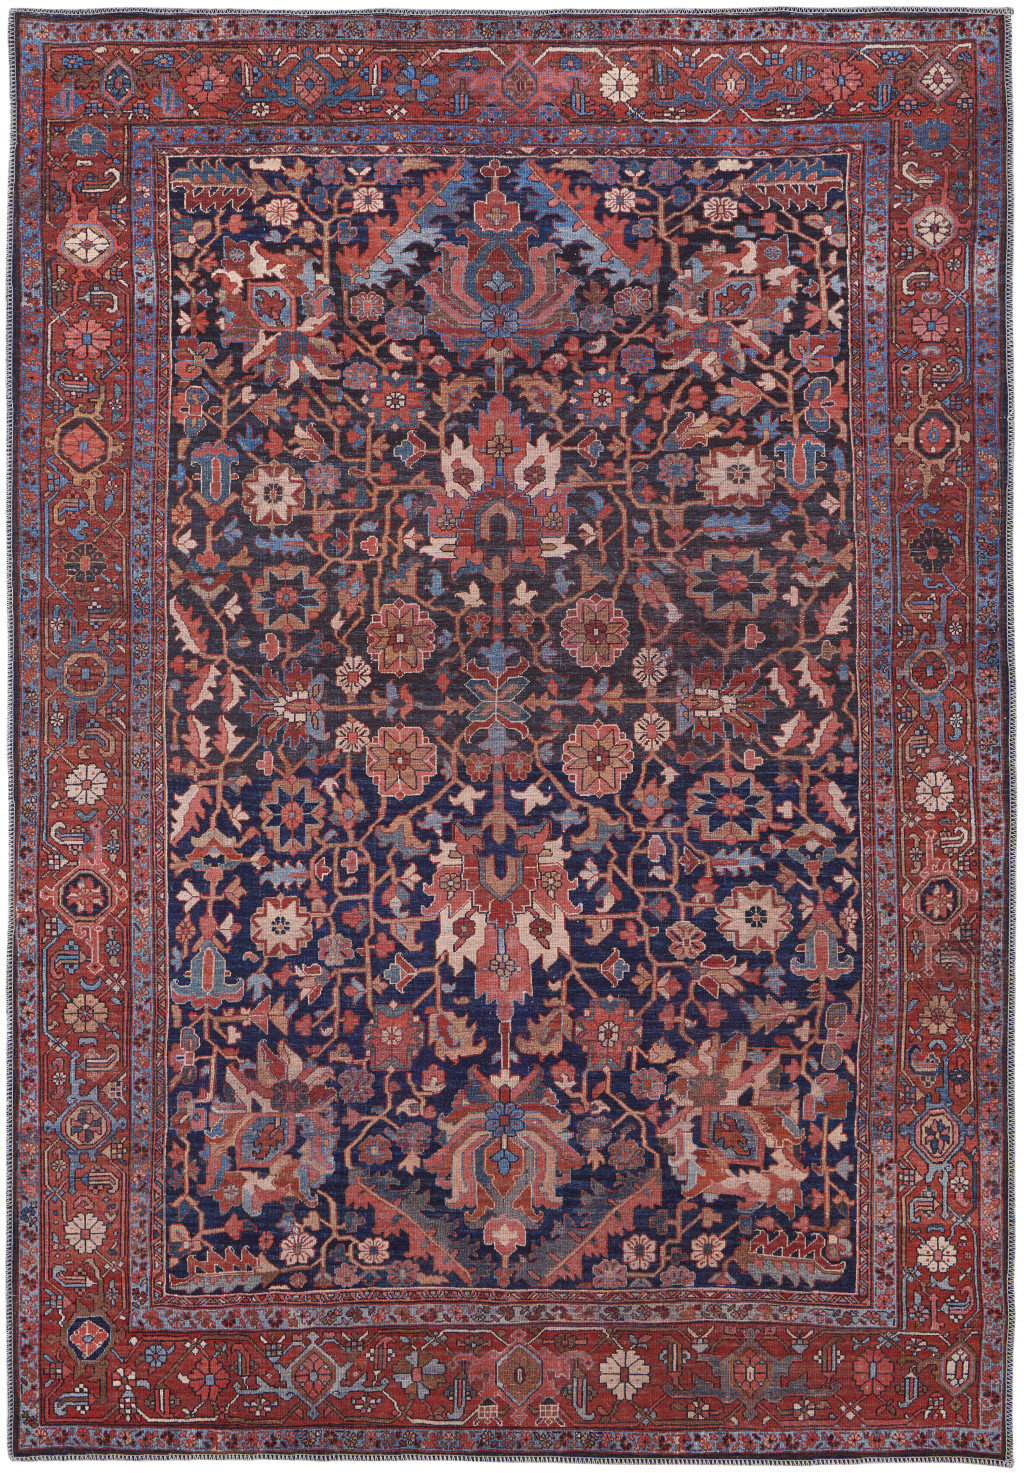 2' X 3' Red Orange And Blue Floral Power Loom Area Rug-515125-1